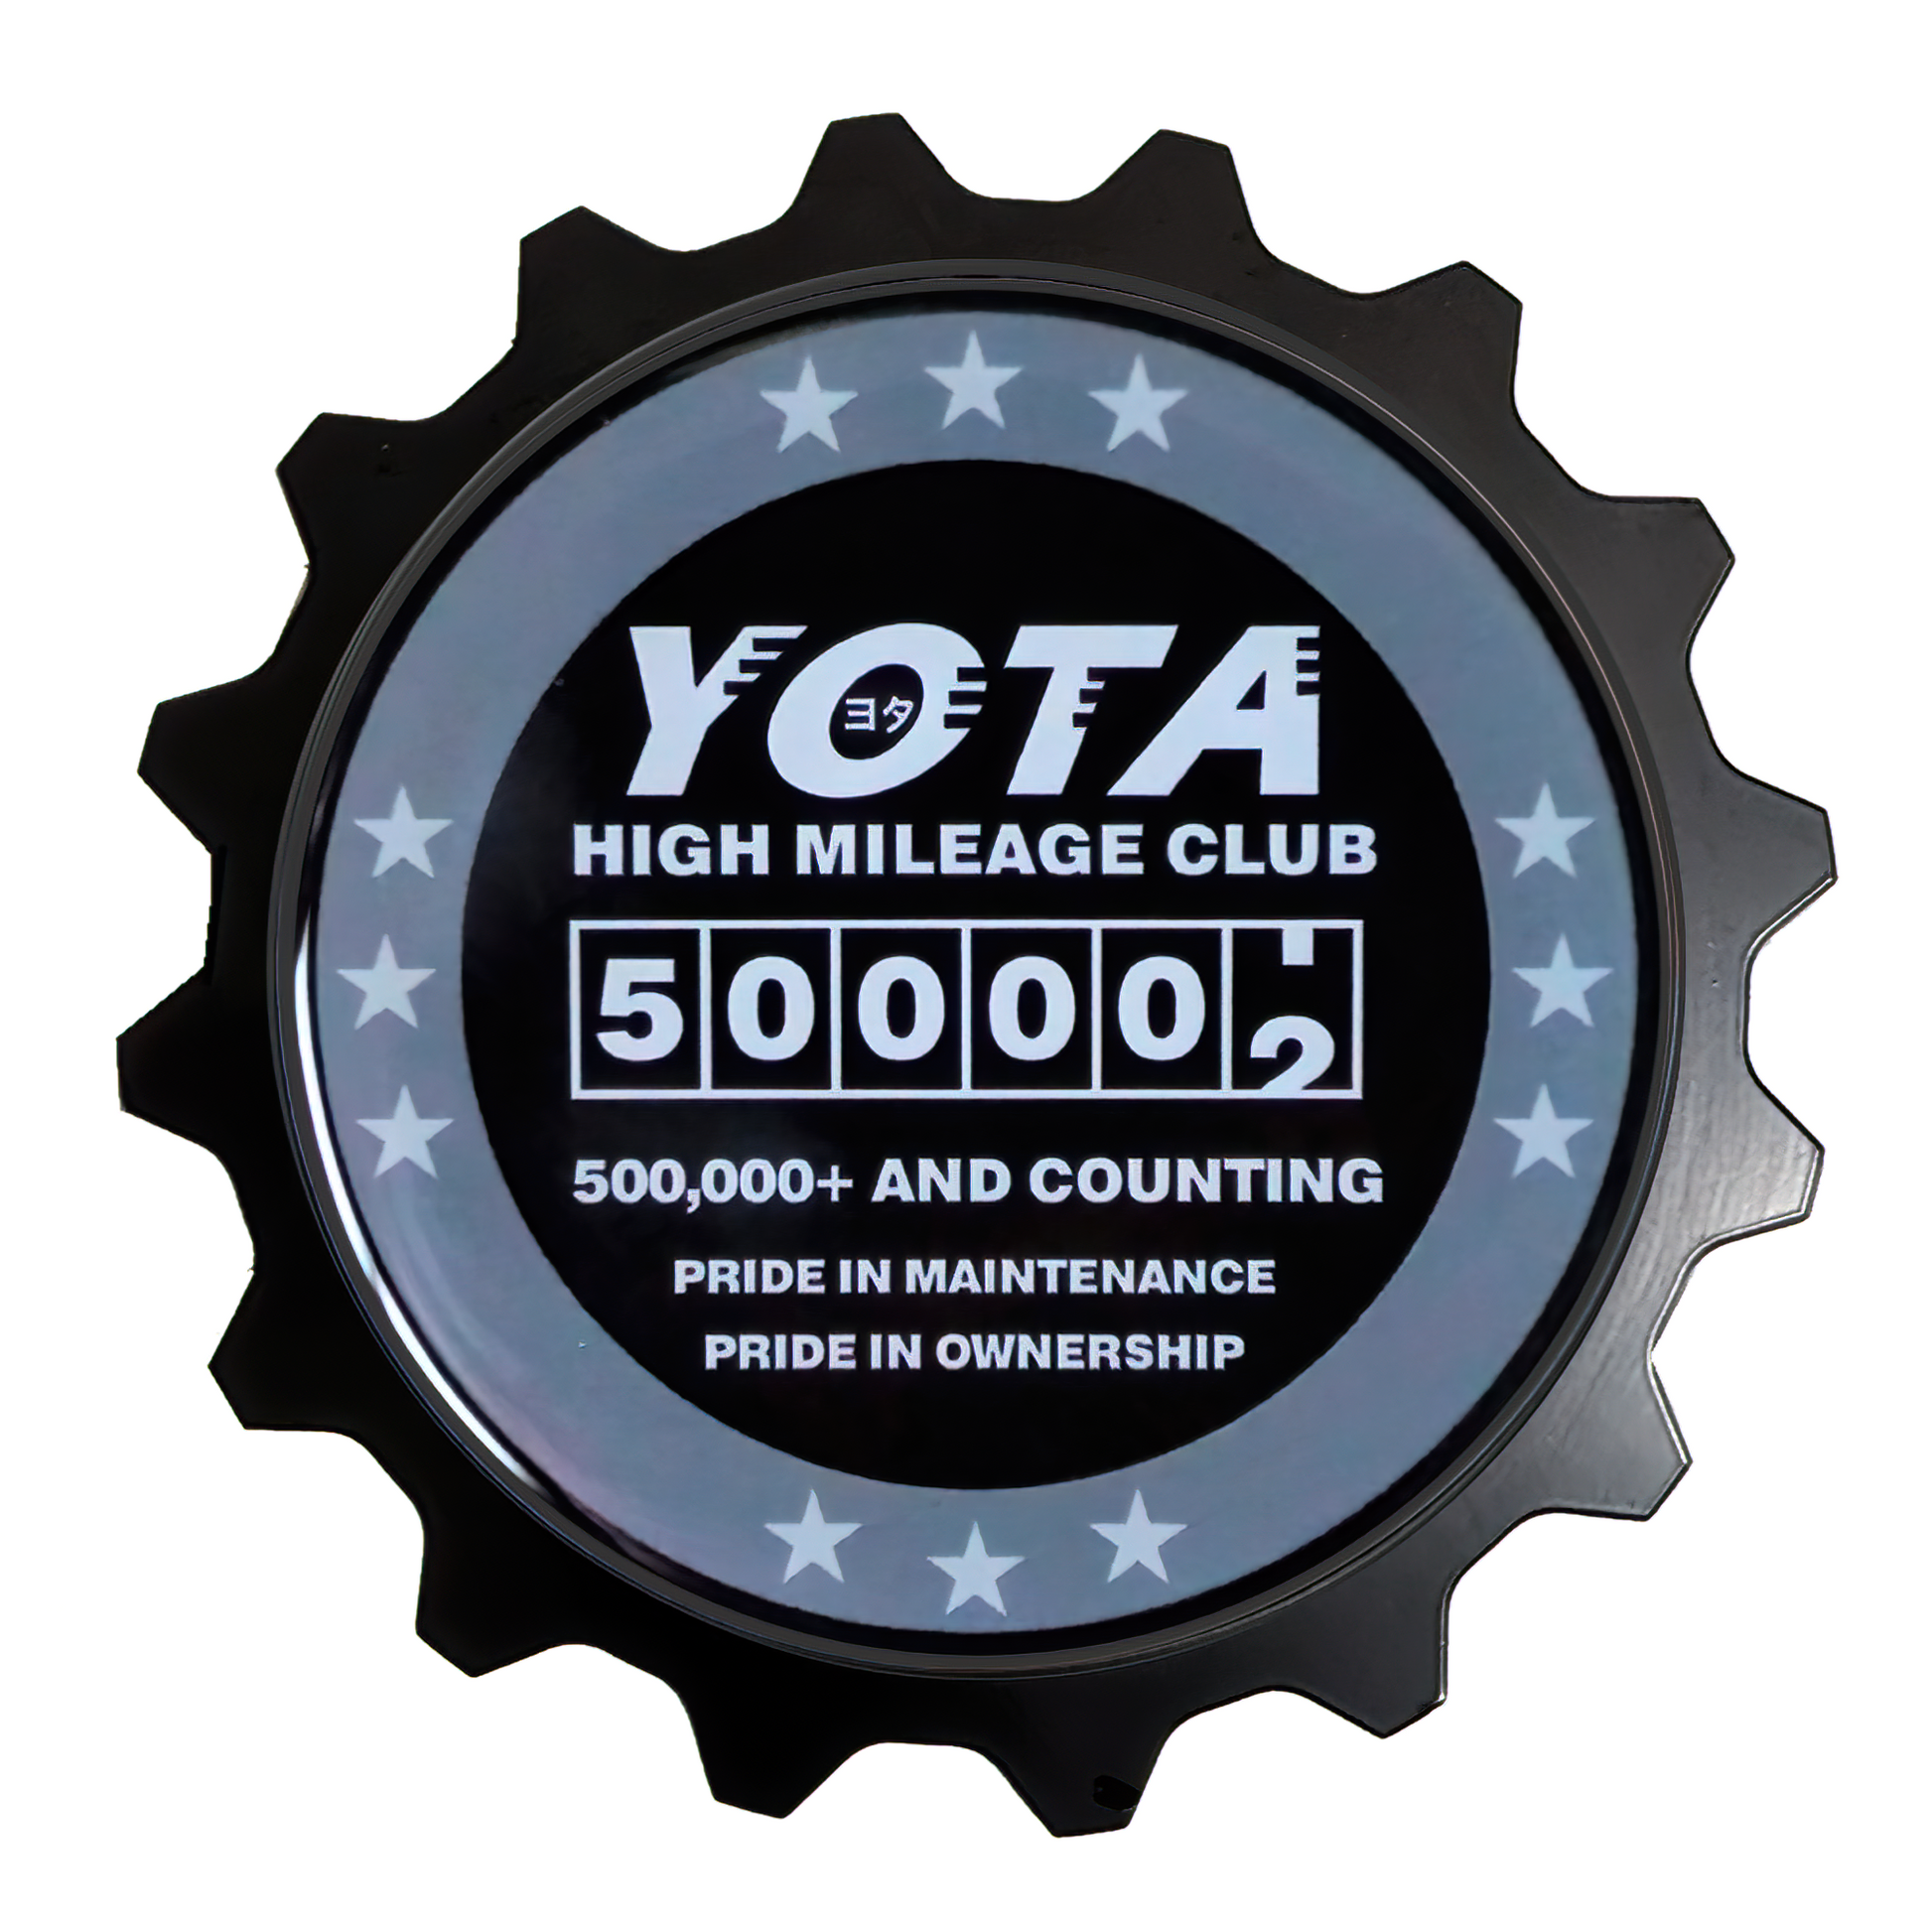 www.toyotahighmileageclub.com Yota High Miles Club Badge For Toyota Owners, High Mileage 500K is something to celebrate! If you hit the 500,000 mile mark in your reliable Toyota this is the badge of honor for you. We also have this design in a patch and decal sticker.